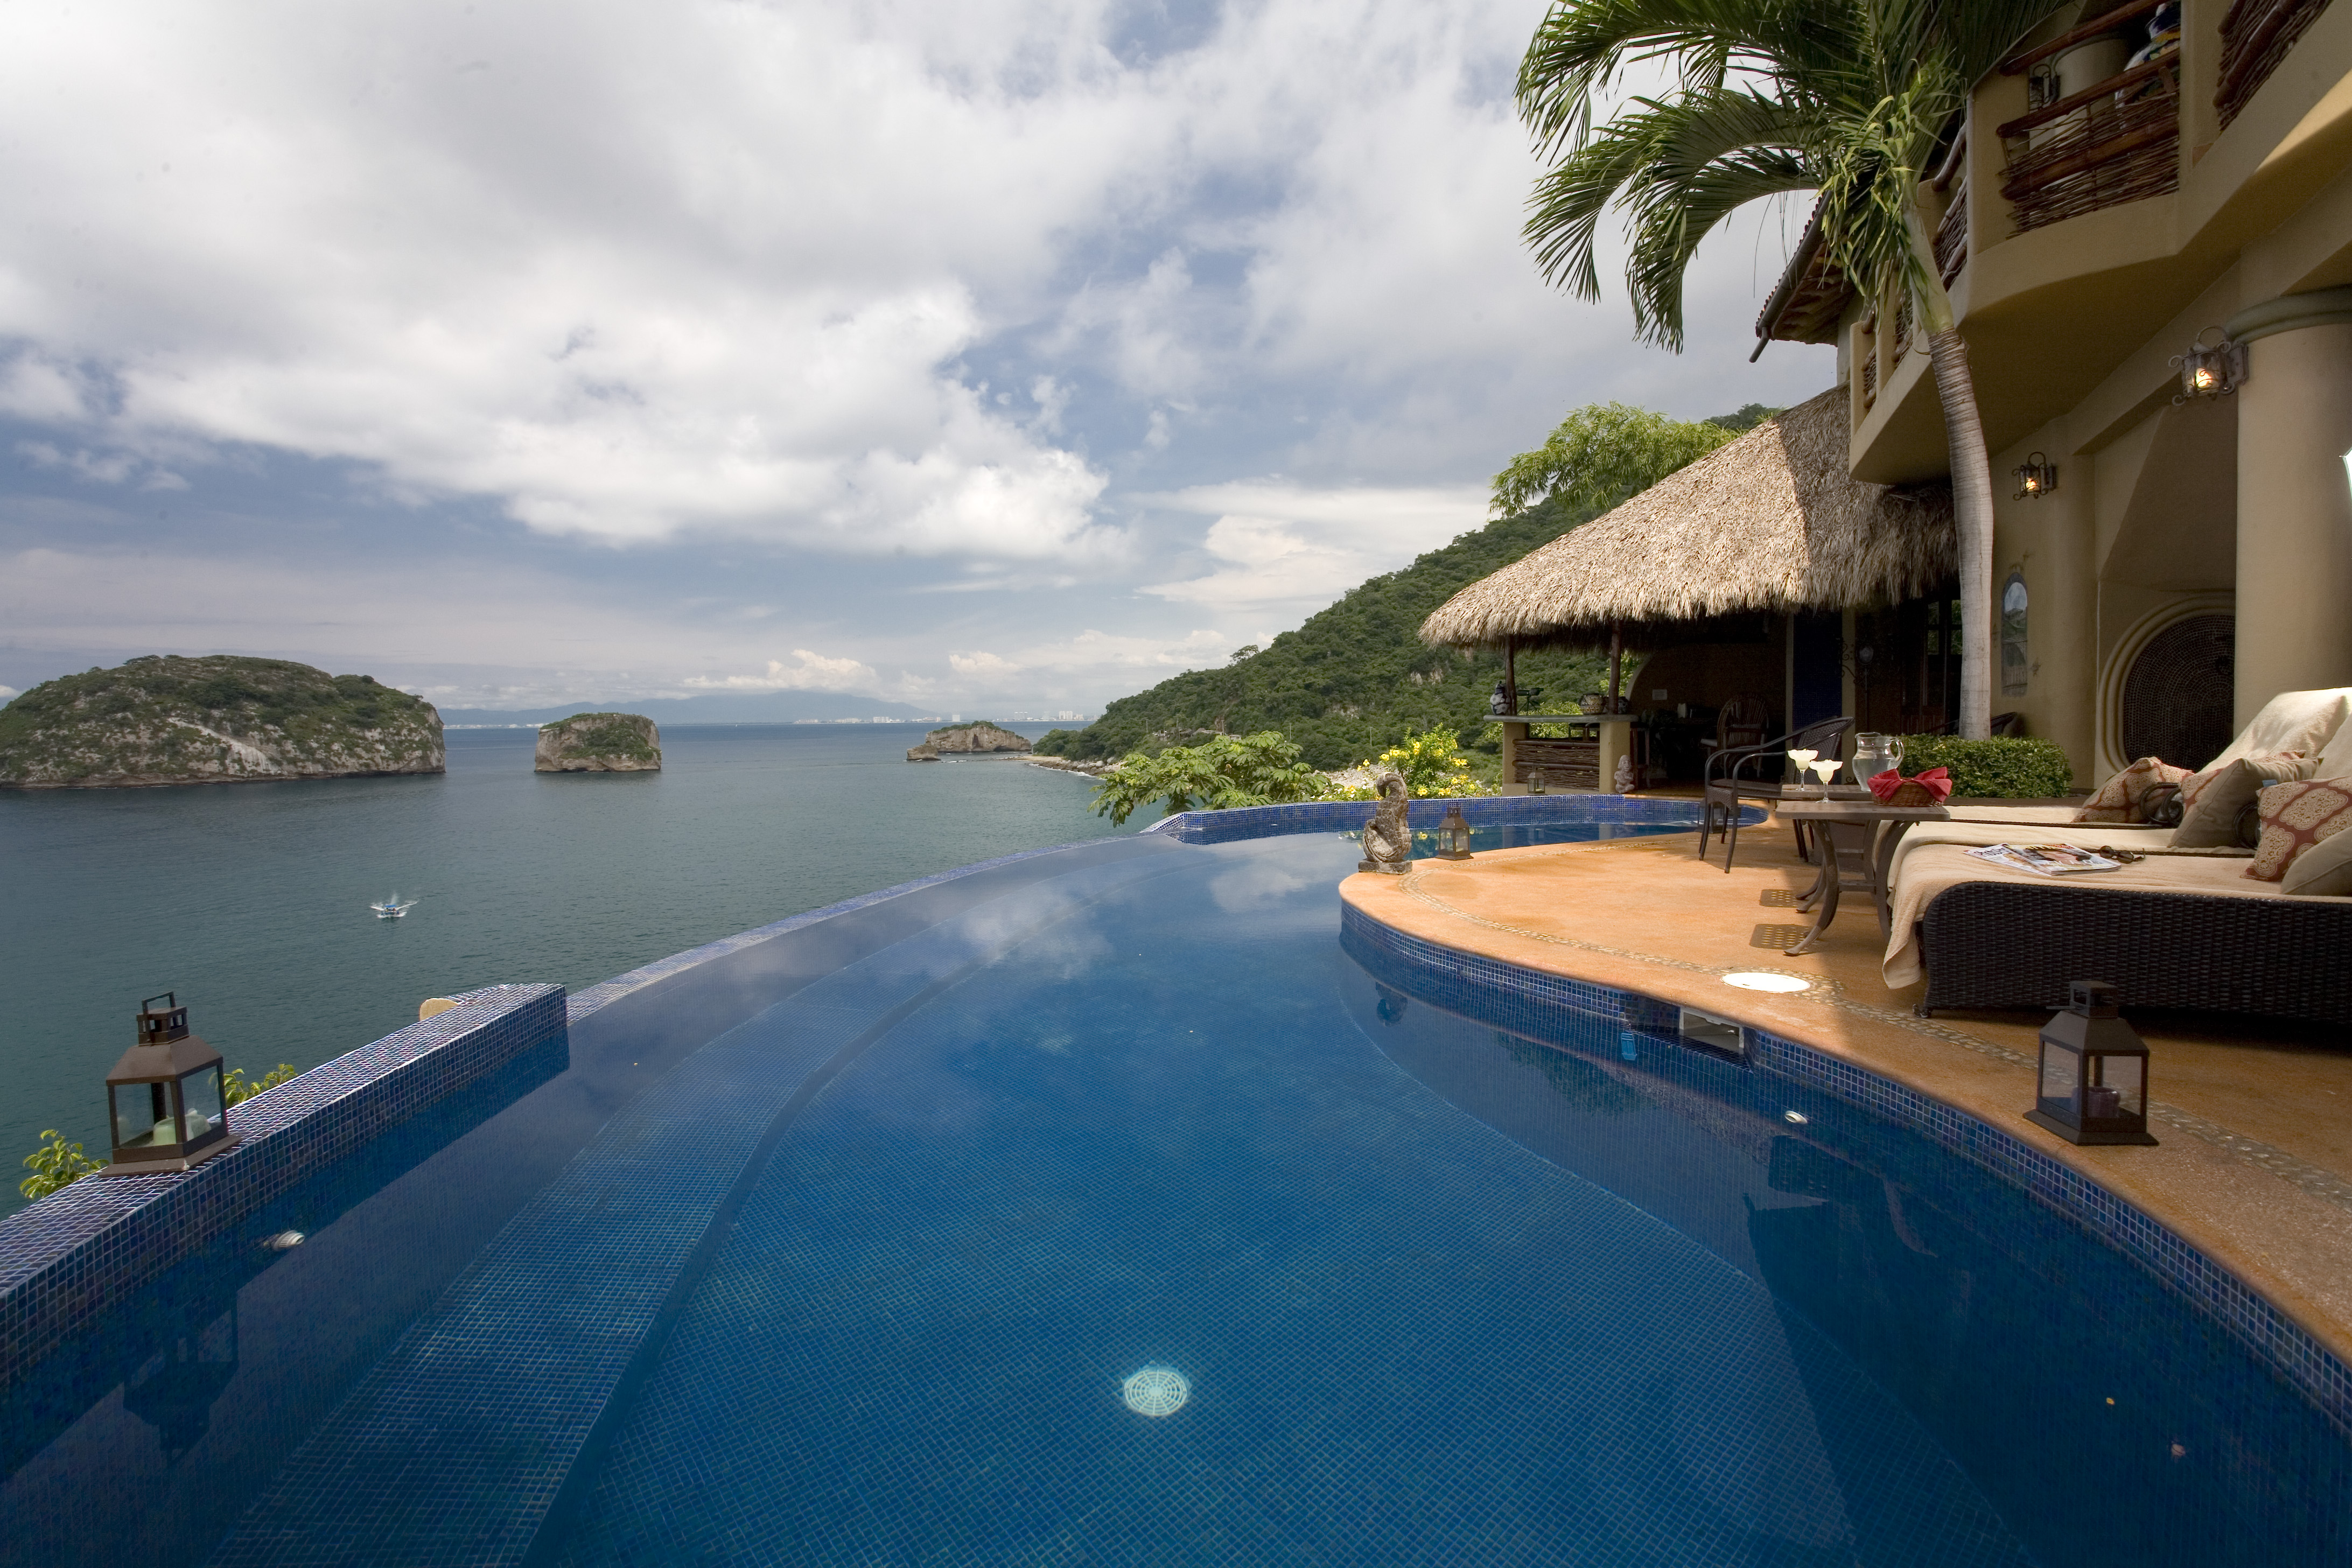 Poolside and view - STUNNING!